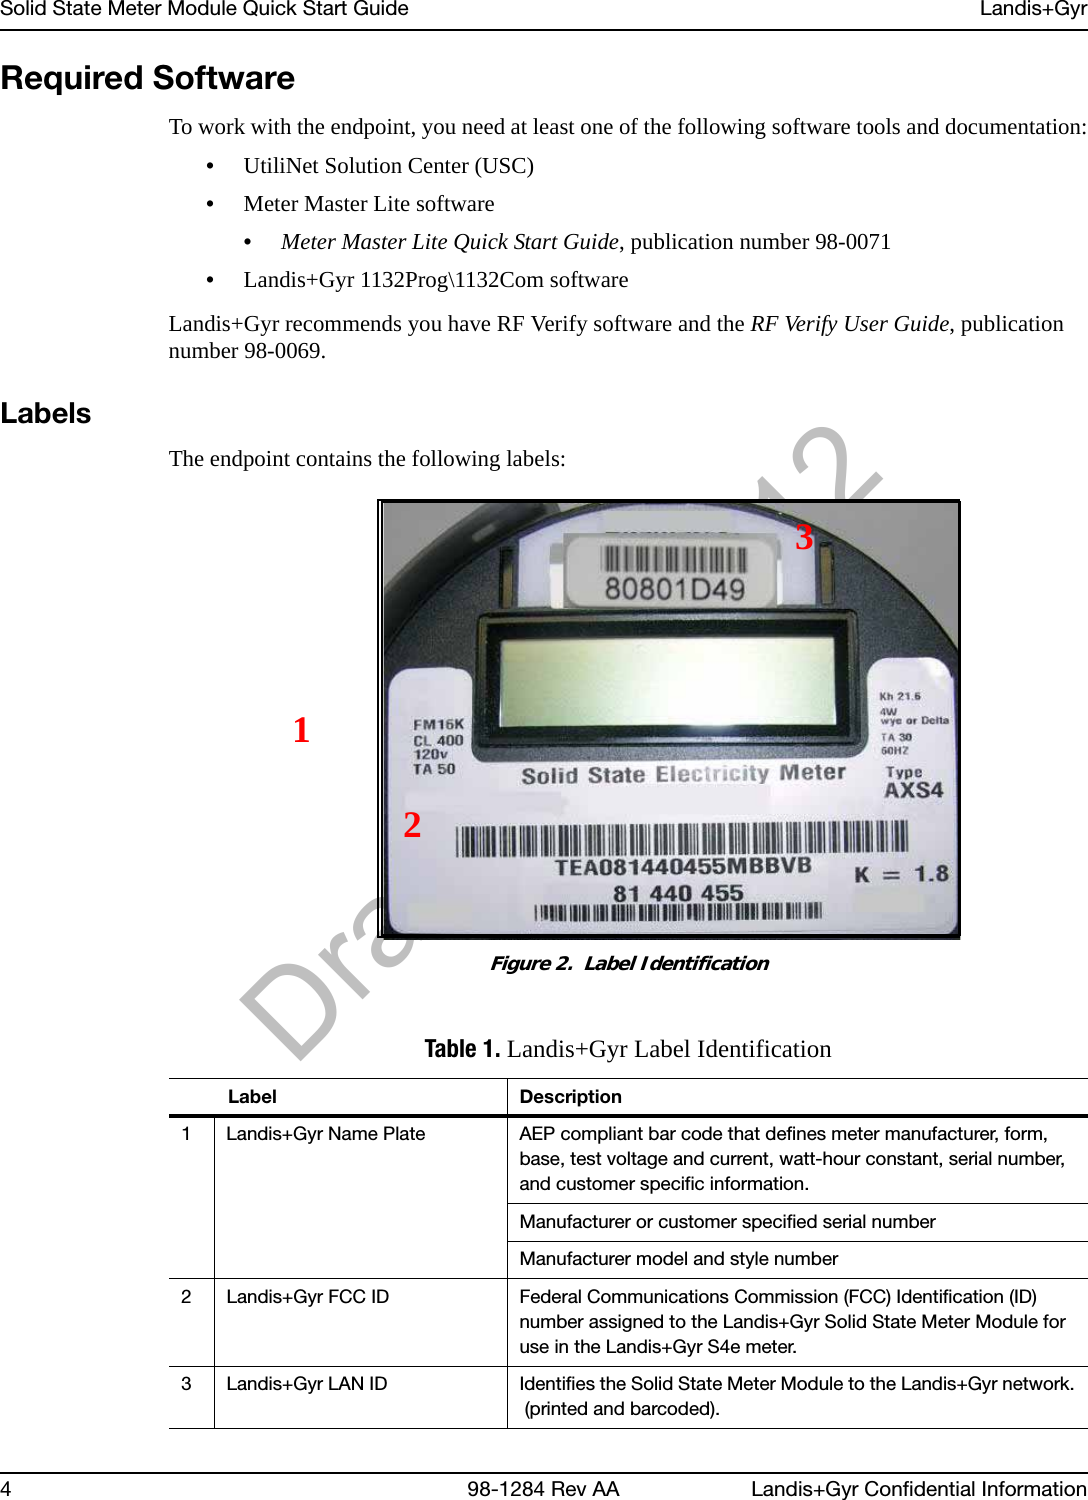 Draft 12/7/2012Solid State Meter Module Quick Start Guide Landis+Gyr4 98-1284 Rev AA Landis+Gyr Confidential InformationRequired SoftwareTo work with the endpoint, you need at least one of the following software tools and documentation:•UtiliNet Solution Center (USC)•Meter Master Lite software•Meter Master Lite Quick Start Guide, publication number 98-0071•Landis+Gyr 1132Prog\1132Com softwareLandis+Gyr recommends you have RF Verify software and the RF Verify User Guide, publication number 98-0069.LabelsThe endpoint contains the following labels:Figure 2.  Label IdentificationTable 1. Landis+Gyr Label Identification         Label Description1 Landis+Gyr Name Plate AEP compliant bar code that defines meter manufacturer, form, base, test voltage and current, watt-hour constant, serial number, and customer specific information.Manufacturer or customer specified serial numberManufacturer model and style number2 Landis+Gyr FCC ID Federal Communications Commission (FCC) Identification (ID) number assigned to the Landis+Gyr Solid State Meter Module for use in the Landis+Gyr S4e meter. 3 Landis+Gyr LAN ID Identifies the Solid State Meter Module to the Landis+Gyr network. (printed and barcoded).123